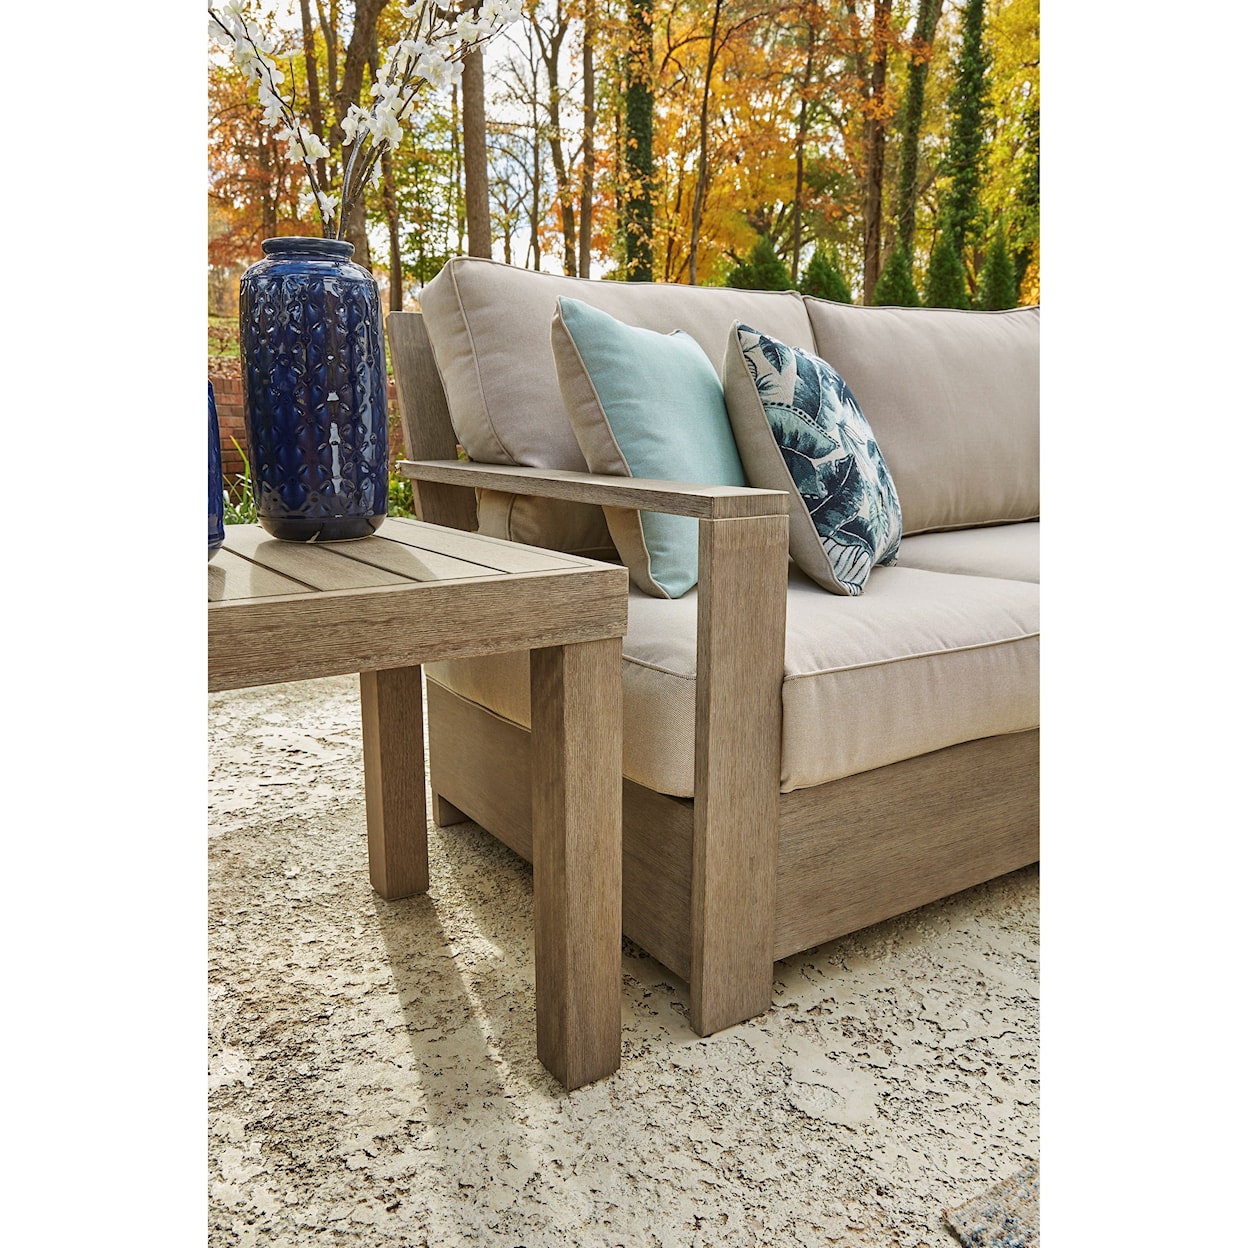 Signature Design by Ashley Silo Point 4-Piece Outdoor Sectional